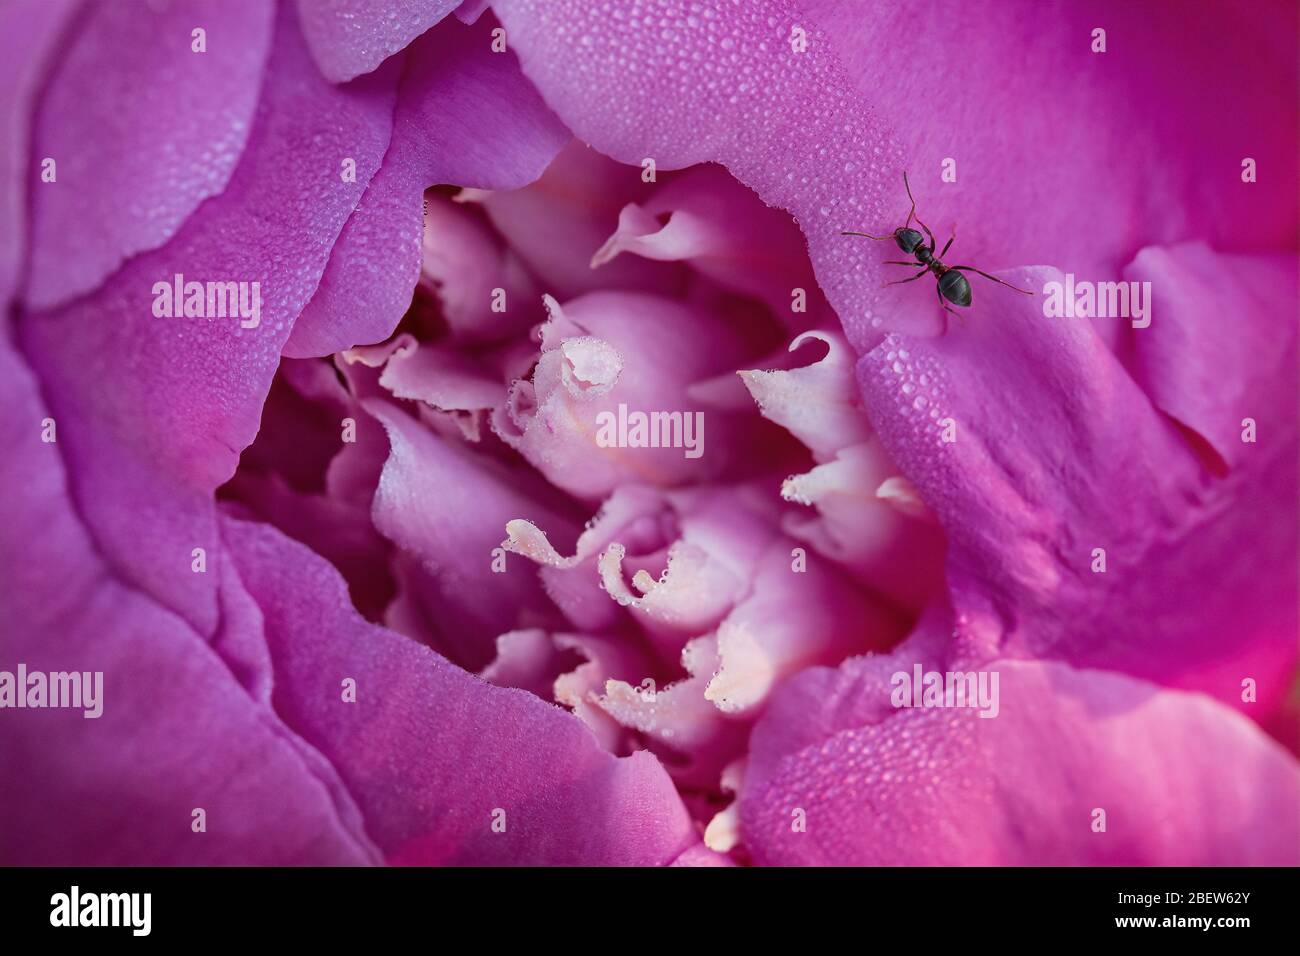 Macro image of a Peony flower with an ant on the petals. Stock Photo